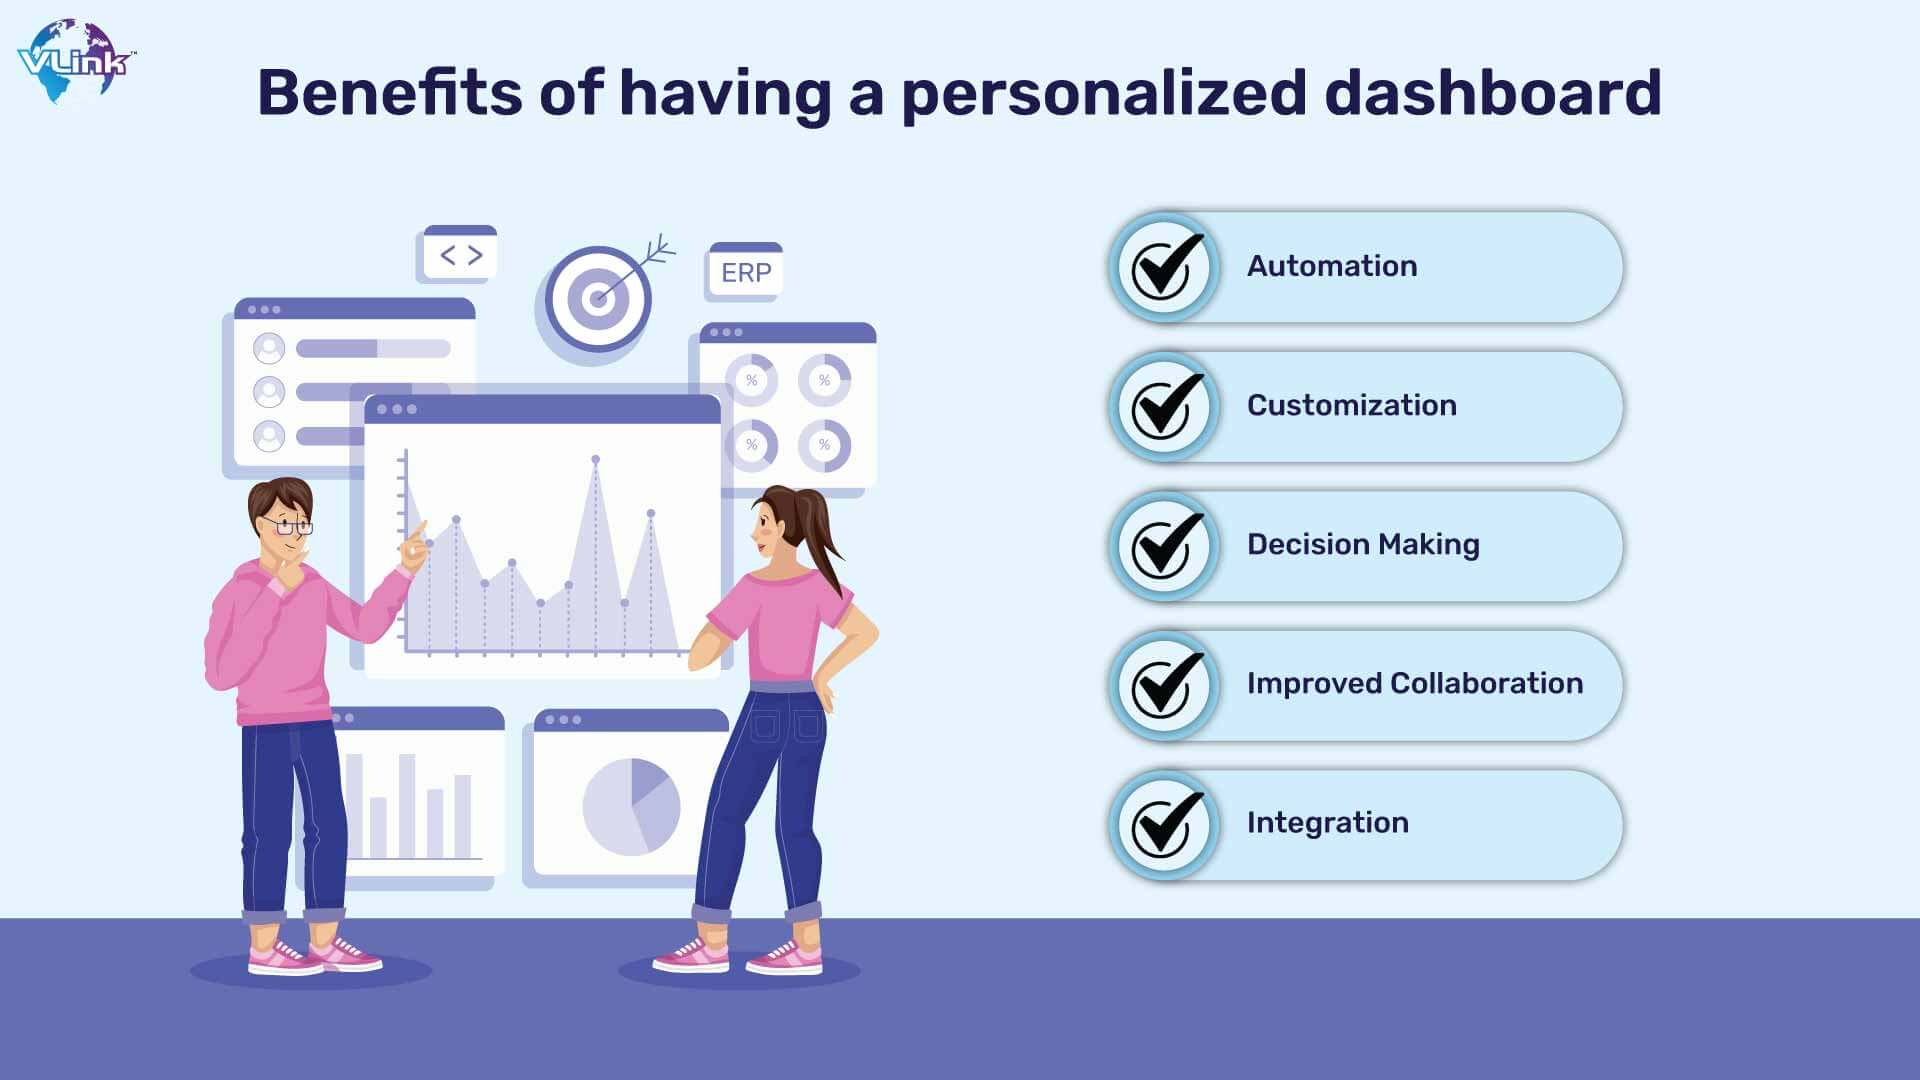 Benefits of having a personalized dashboard